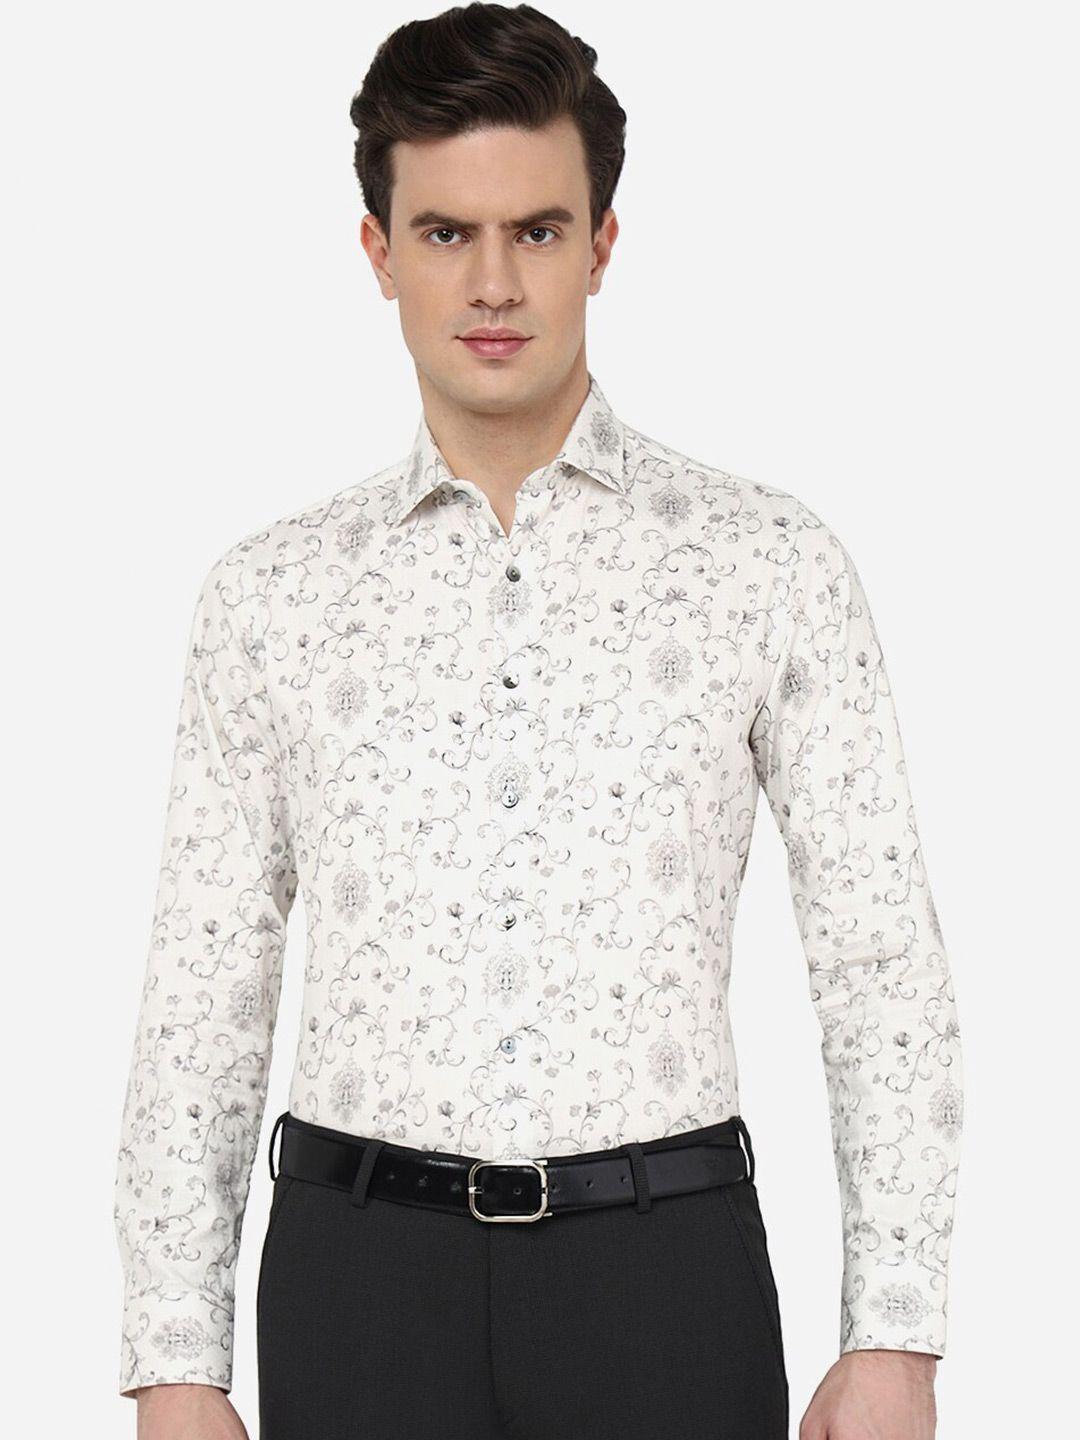 wyre printed slim fit spread collar full sleeve opaque cotton formal shirt